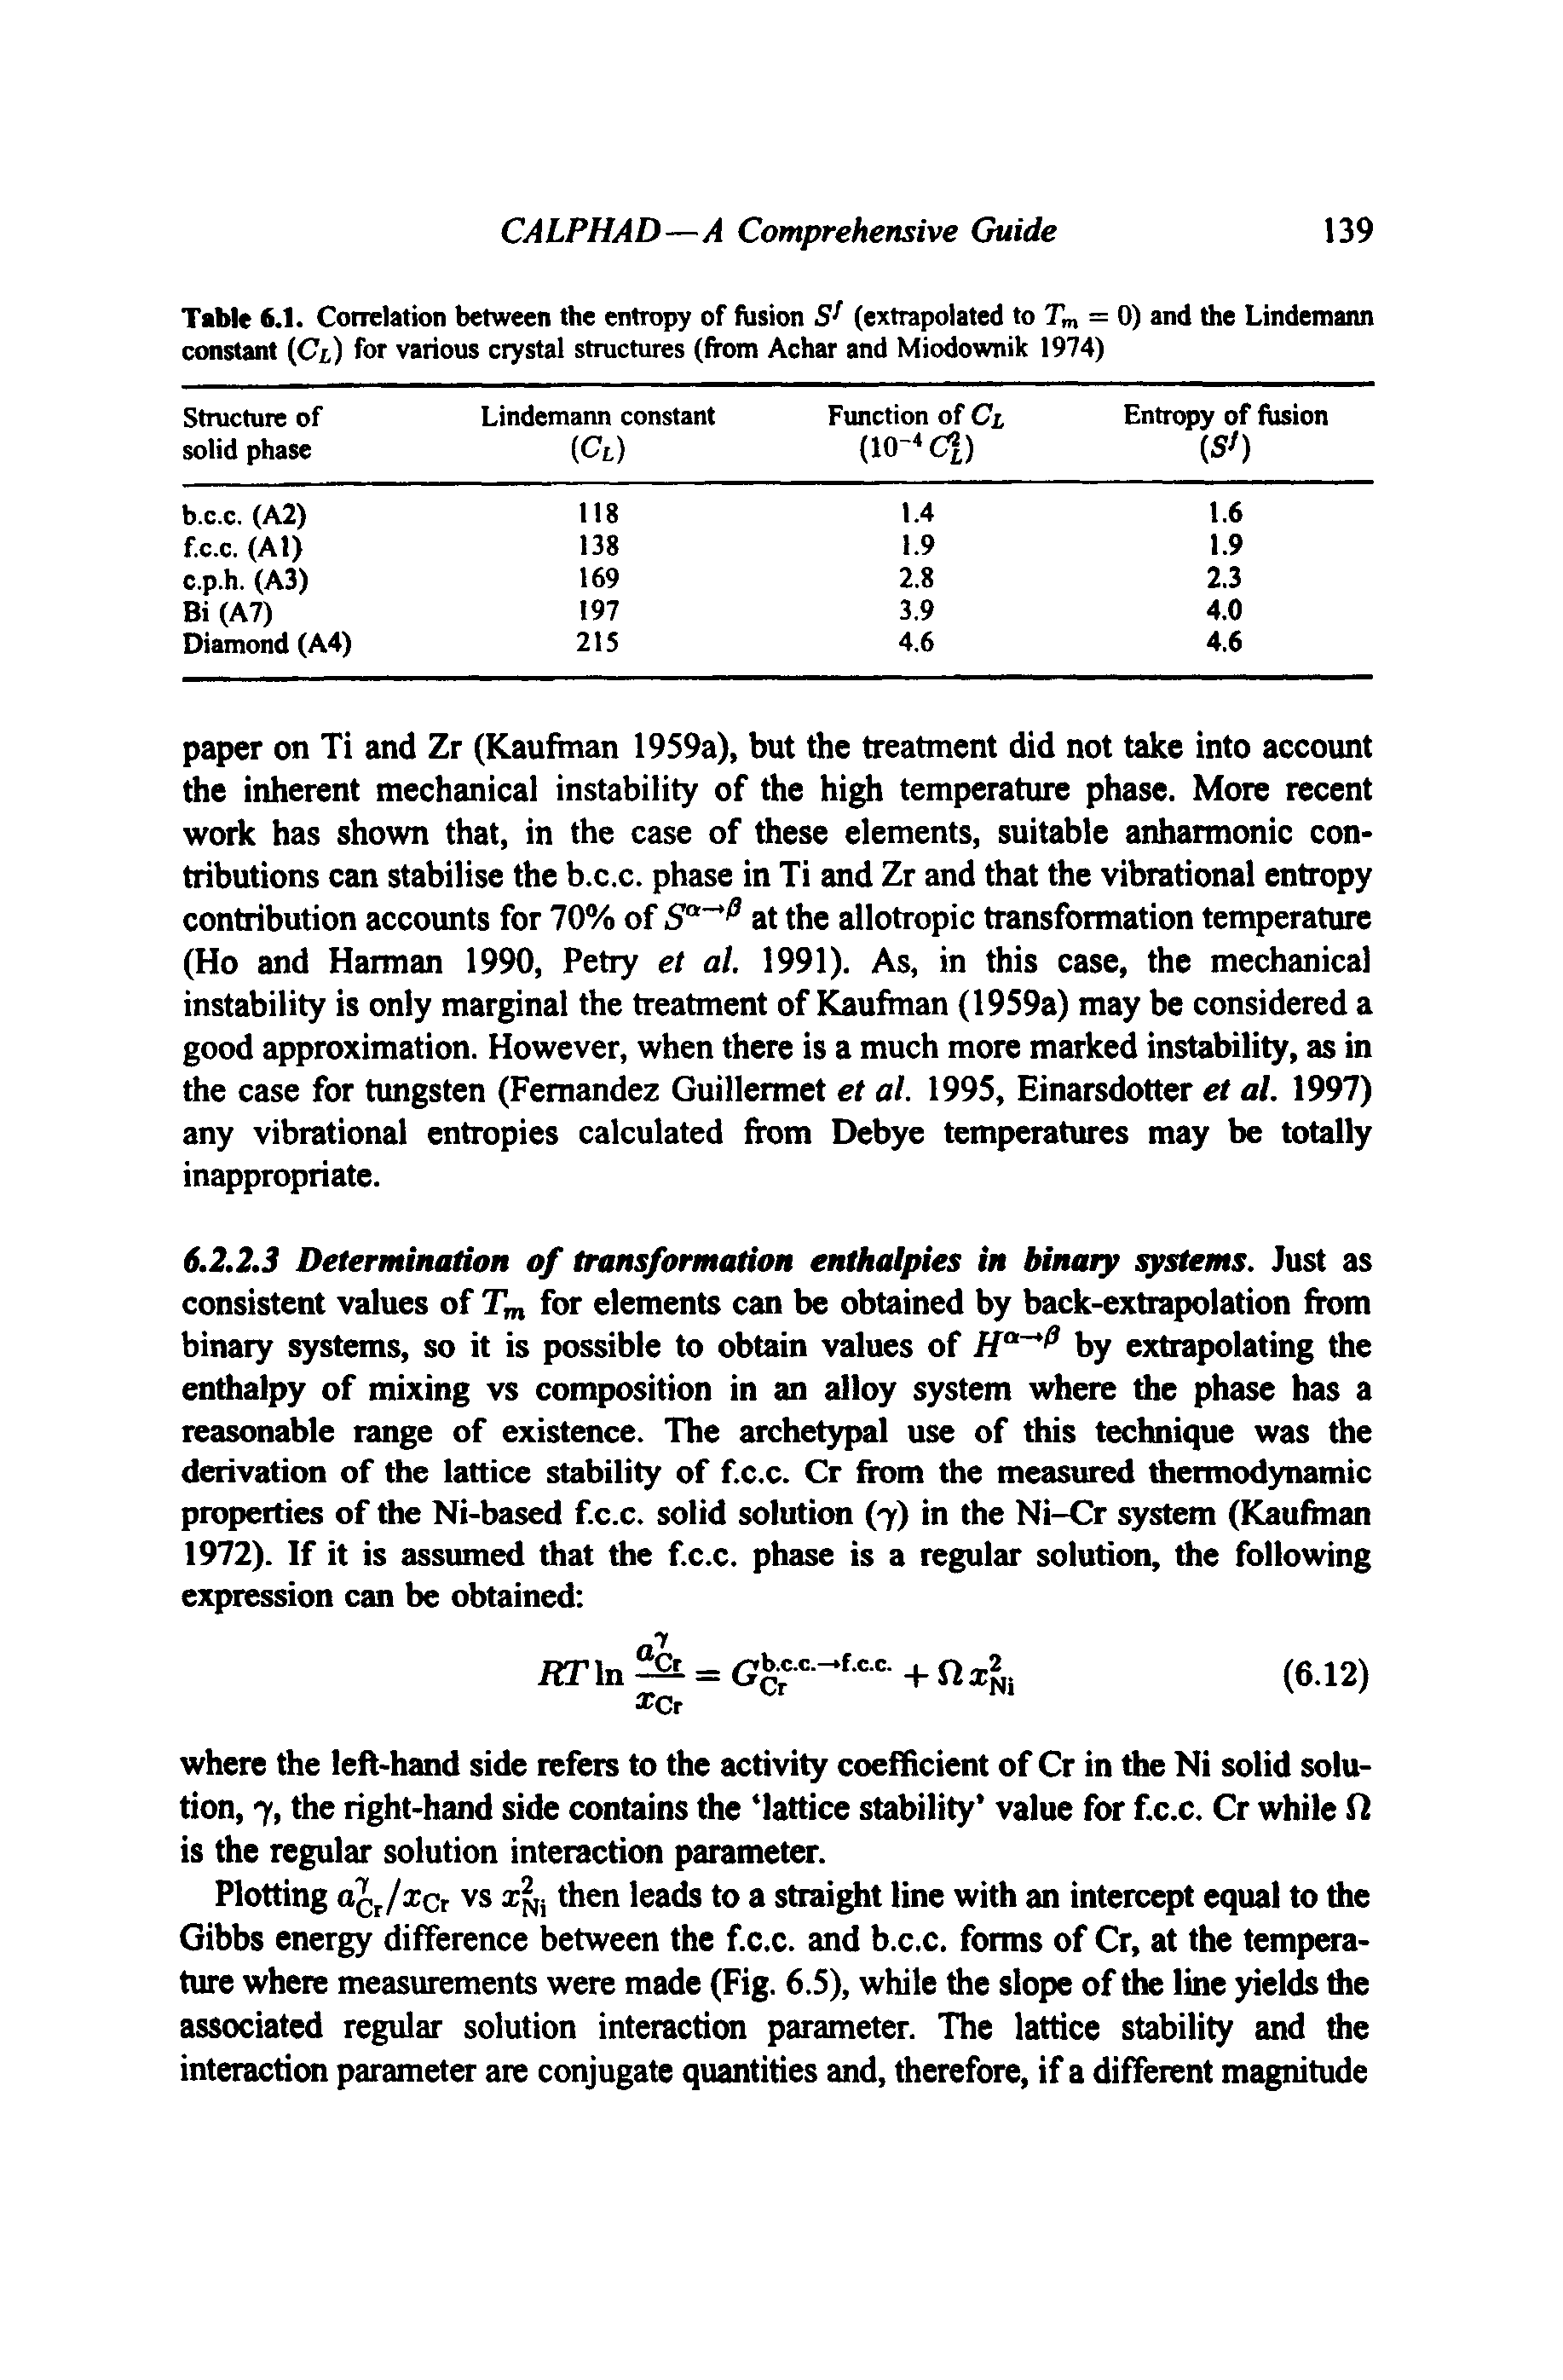 Table 6.1. Correlation between the entropy of fusion (extrapolated to Tm = 0) and the Lindemaim constant (C/,) for various crystal structures (from Achar and Miodownik 1974)...